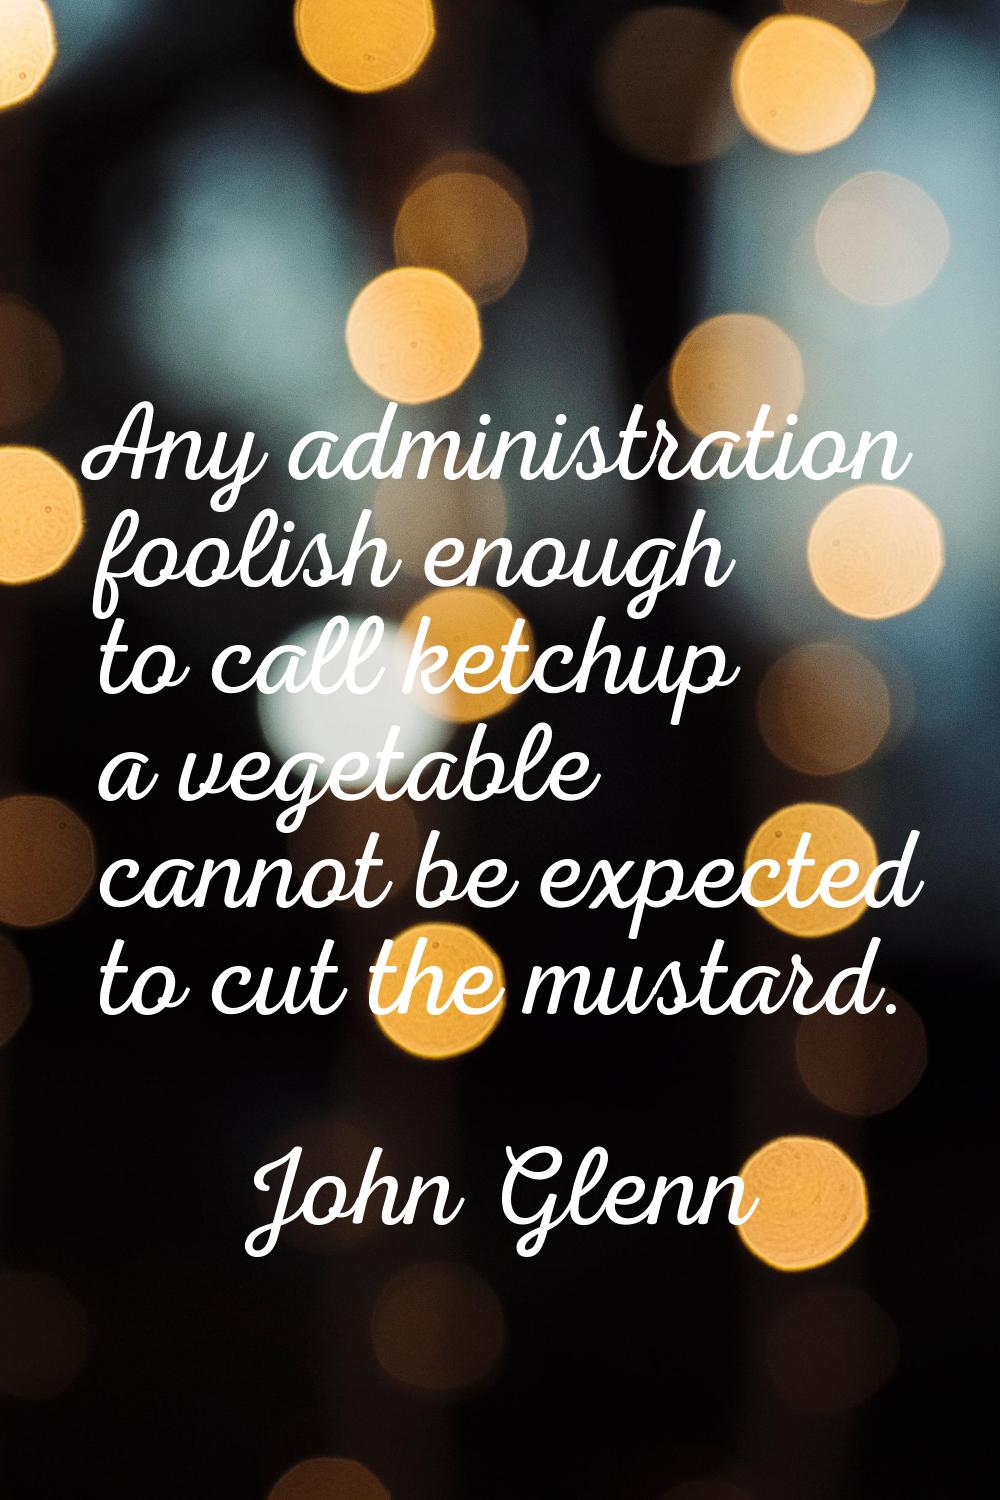 Any administration foolish enough to call ketchup a vegetable cannot be expected to cut the mustard